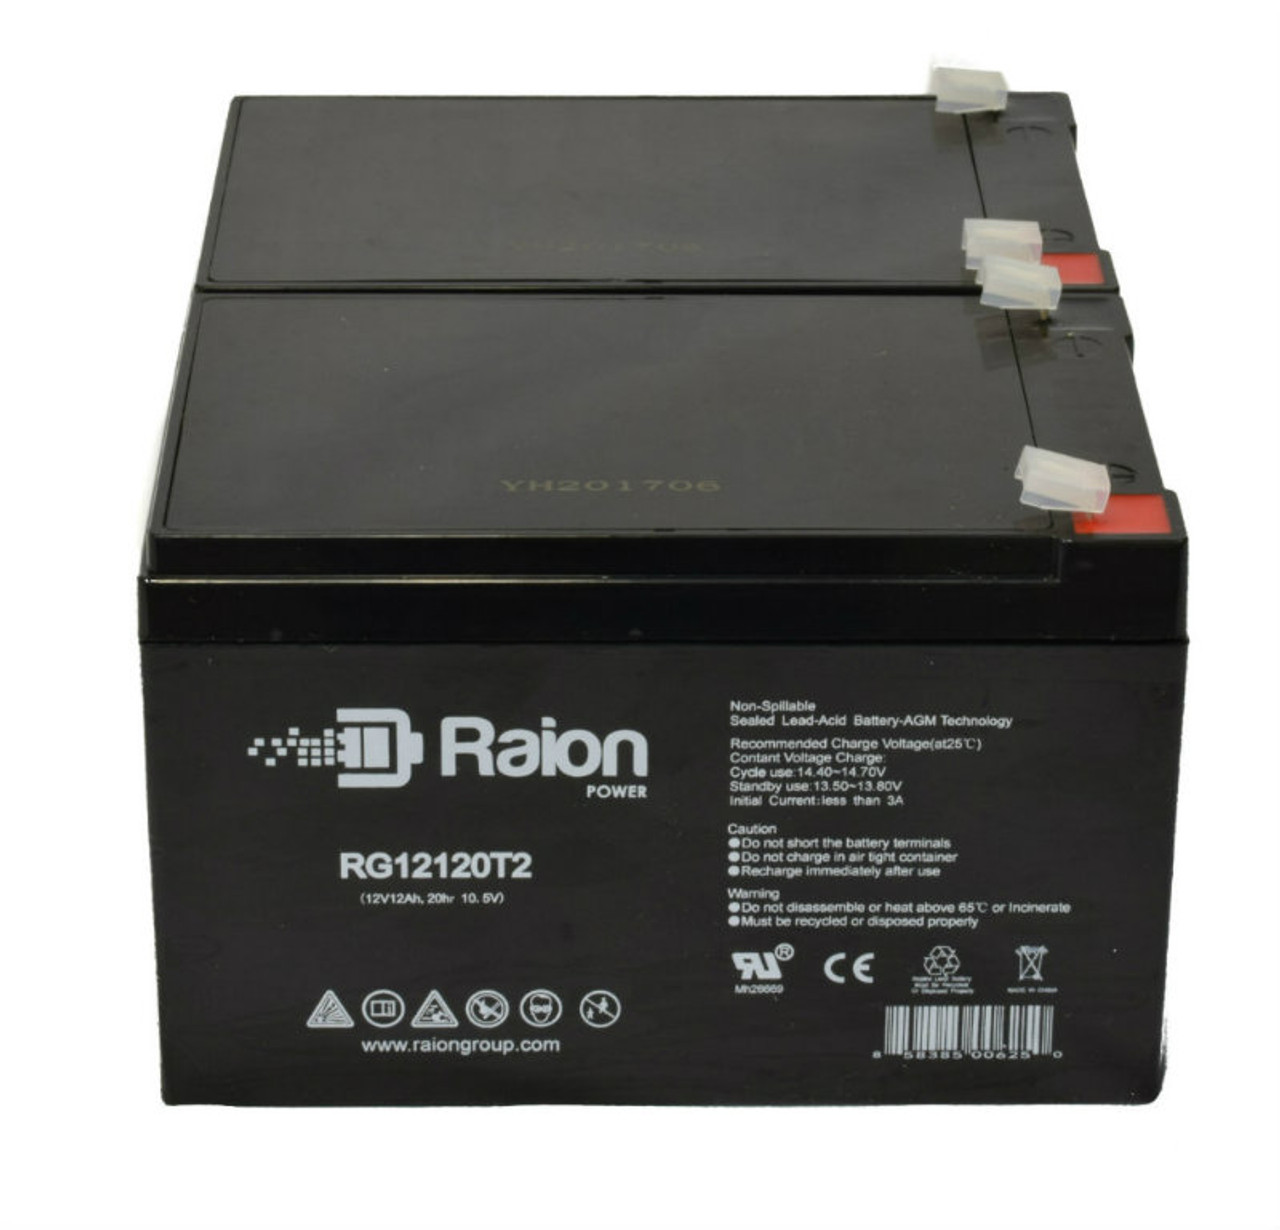 Raion Power 12V 12Ah Replacement Alarm Security System Battery for Altronix AL602UL2ADA - 2 Pack